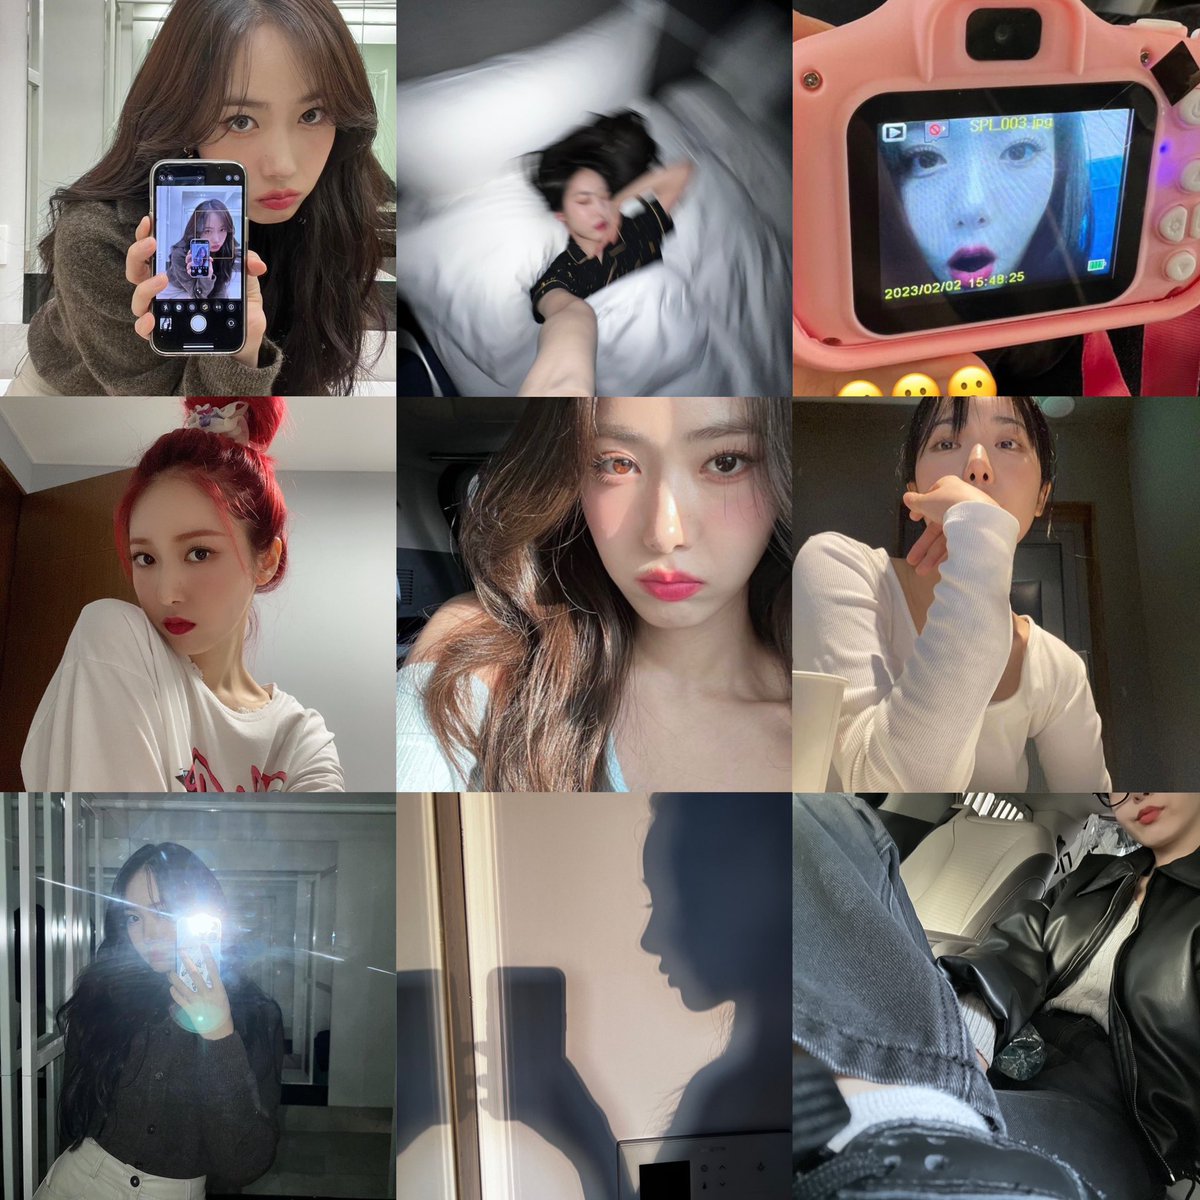 sinb is a genius, her photography skills are crazy and girl is still very humble about it.
being able to make selfies look interesting and different every single time even if it’s just a shoulder up or a hand under her chin she makes it look easy being pretty is just a side fact